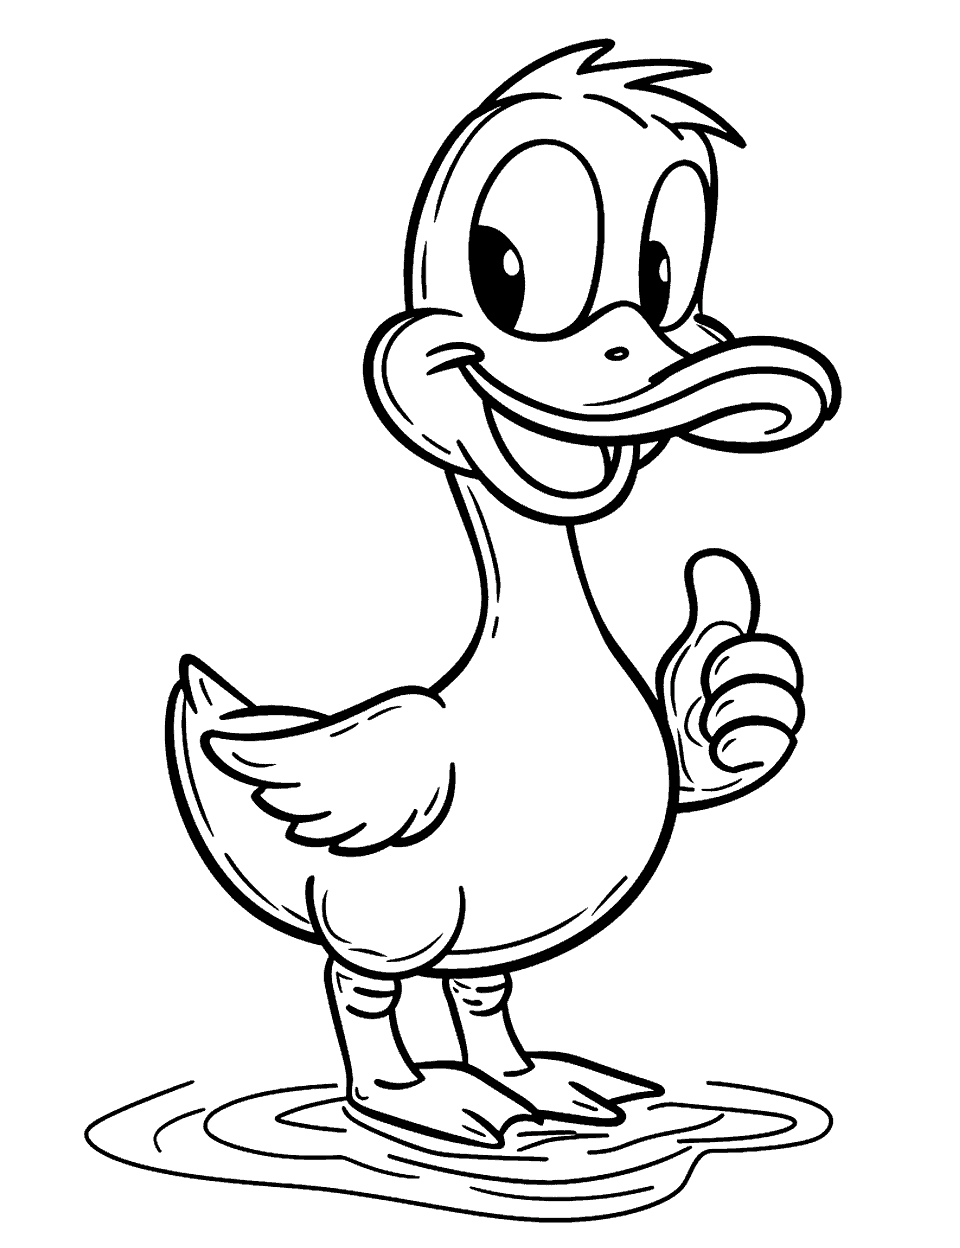 Ducks Approval Coloring Page - Duck smiling and giving a thumbs up of approval.